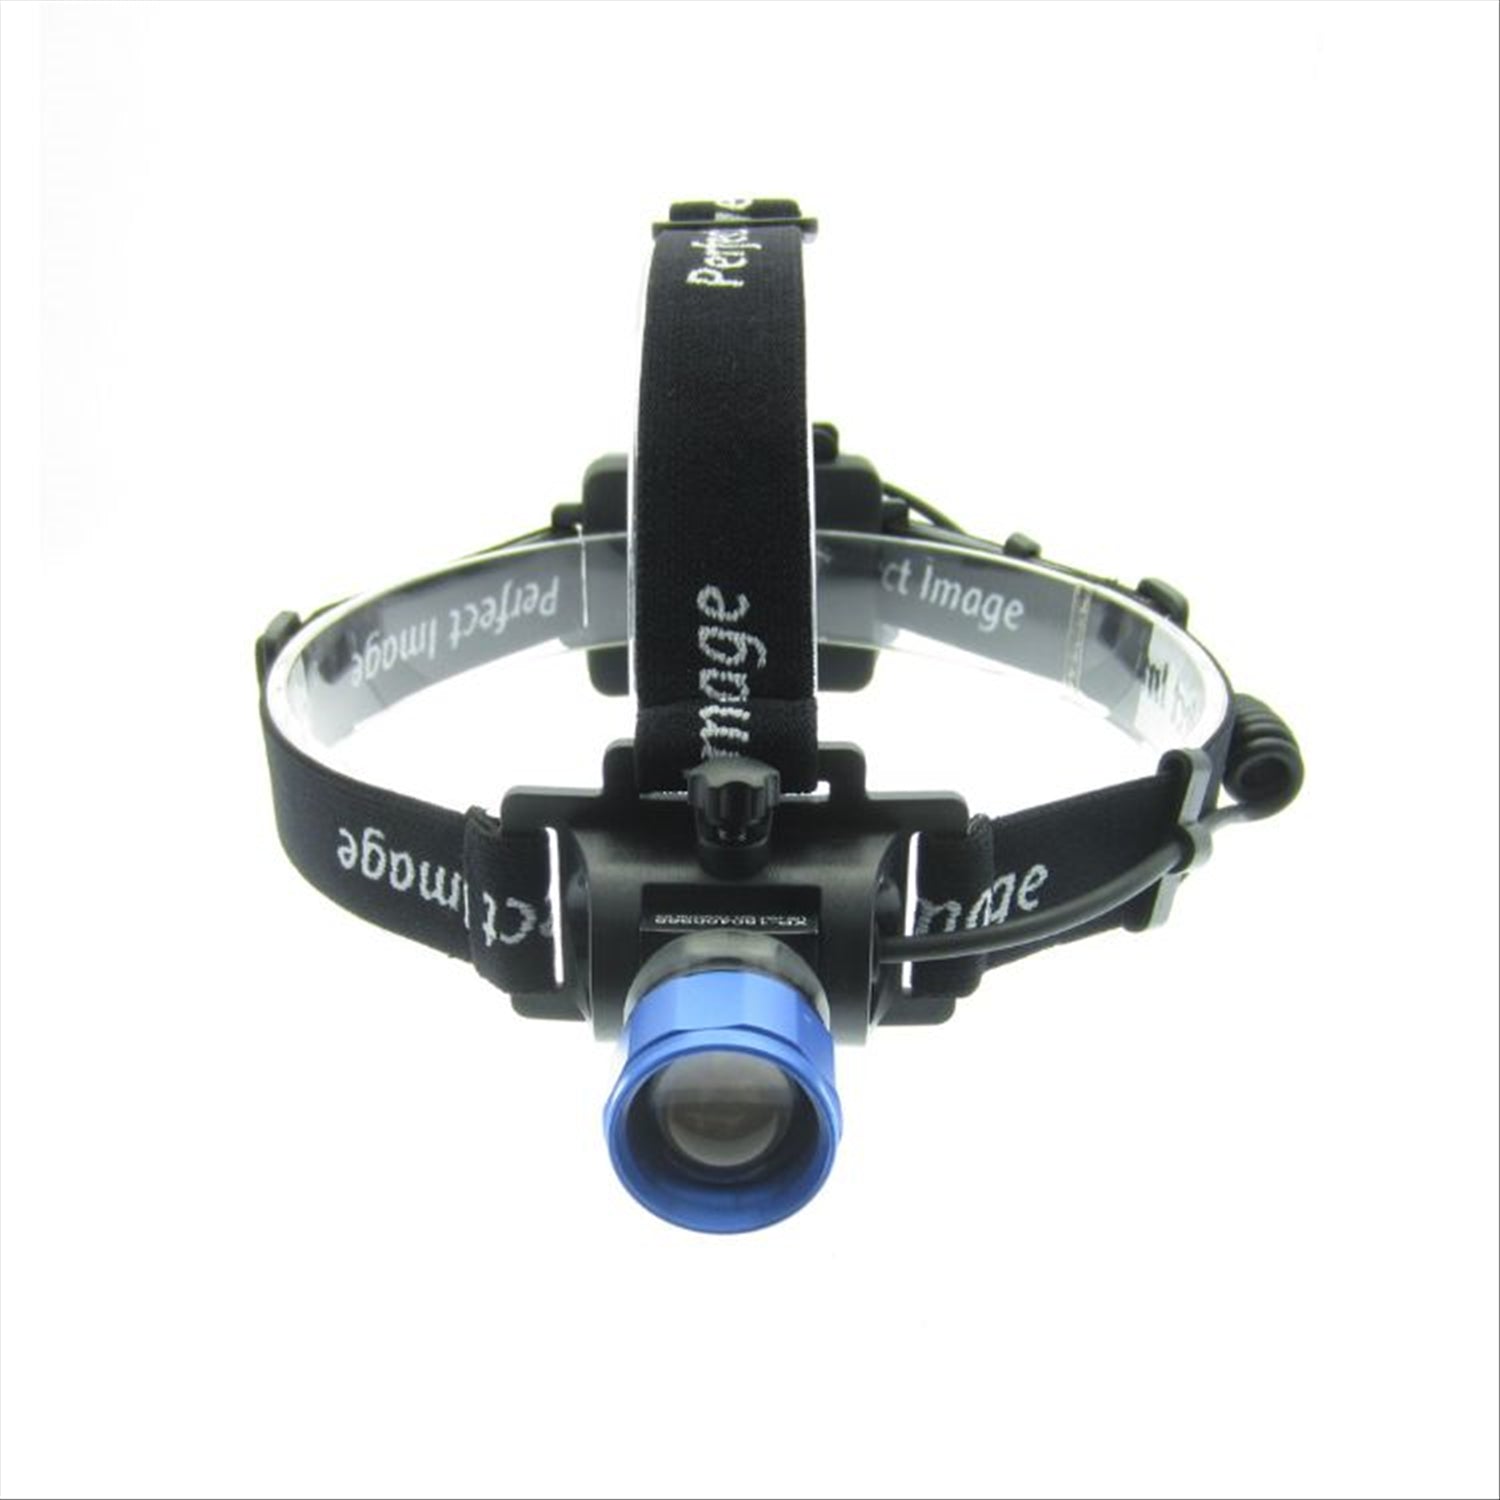 PERFECT IMAGE Perfect Image Headlamp with Zoom Function 580m Lumens with Zoom Function